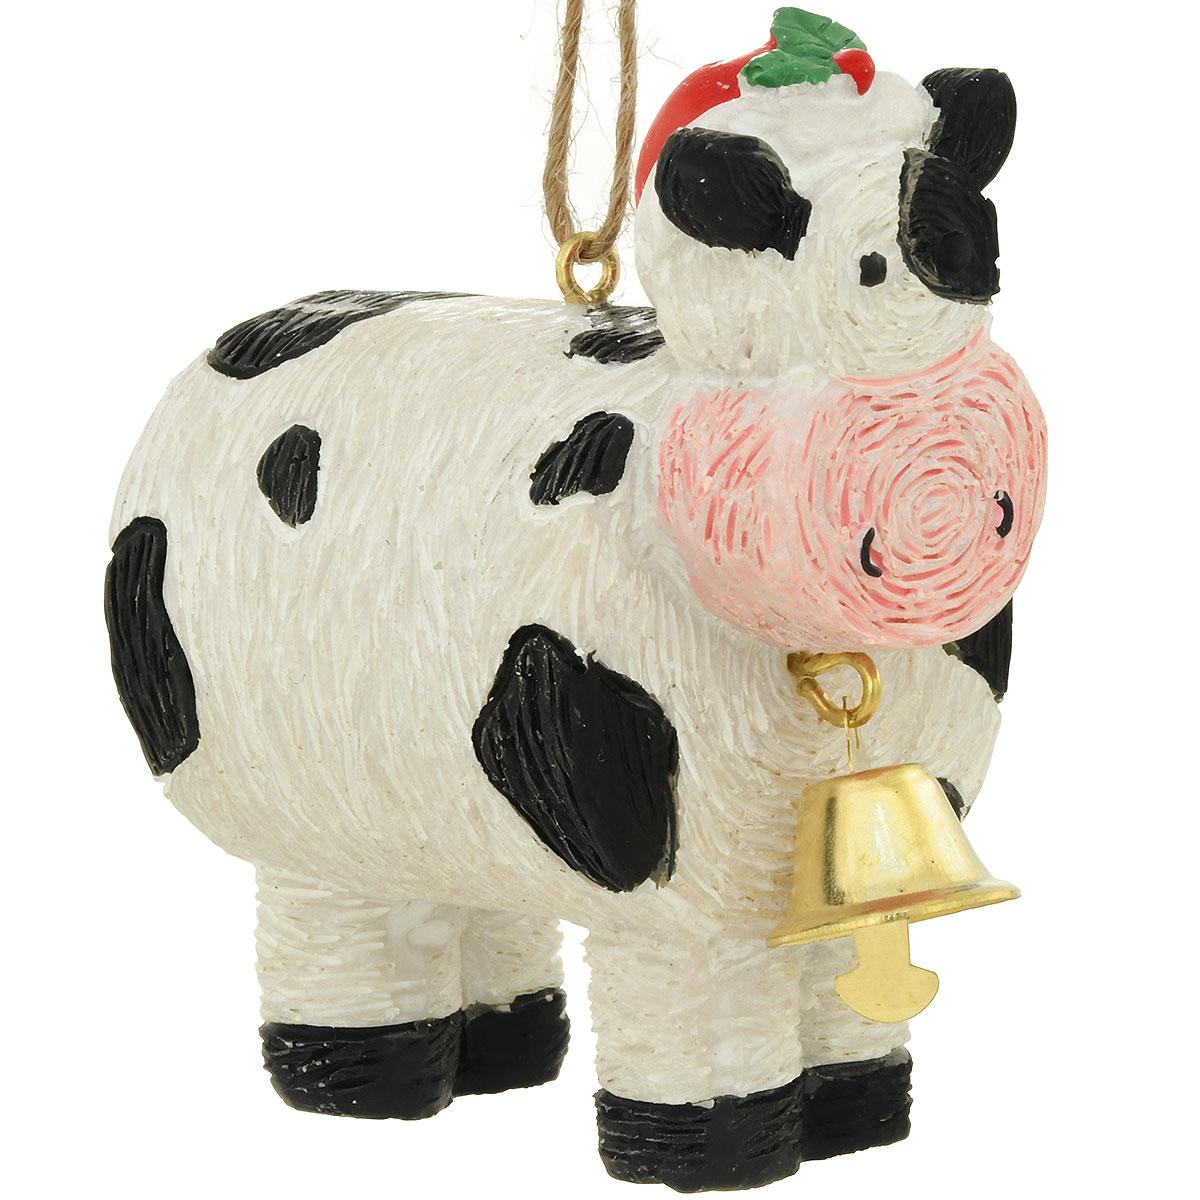 Cow Hay-Bale Ornament